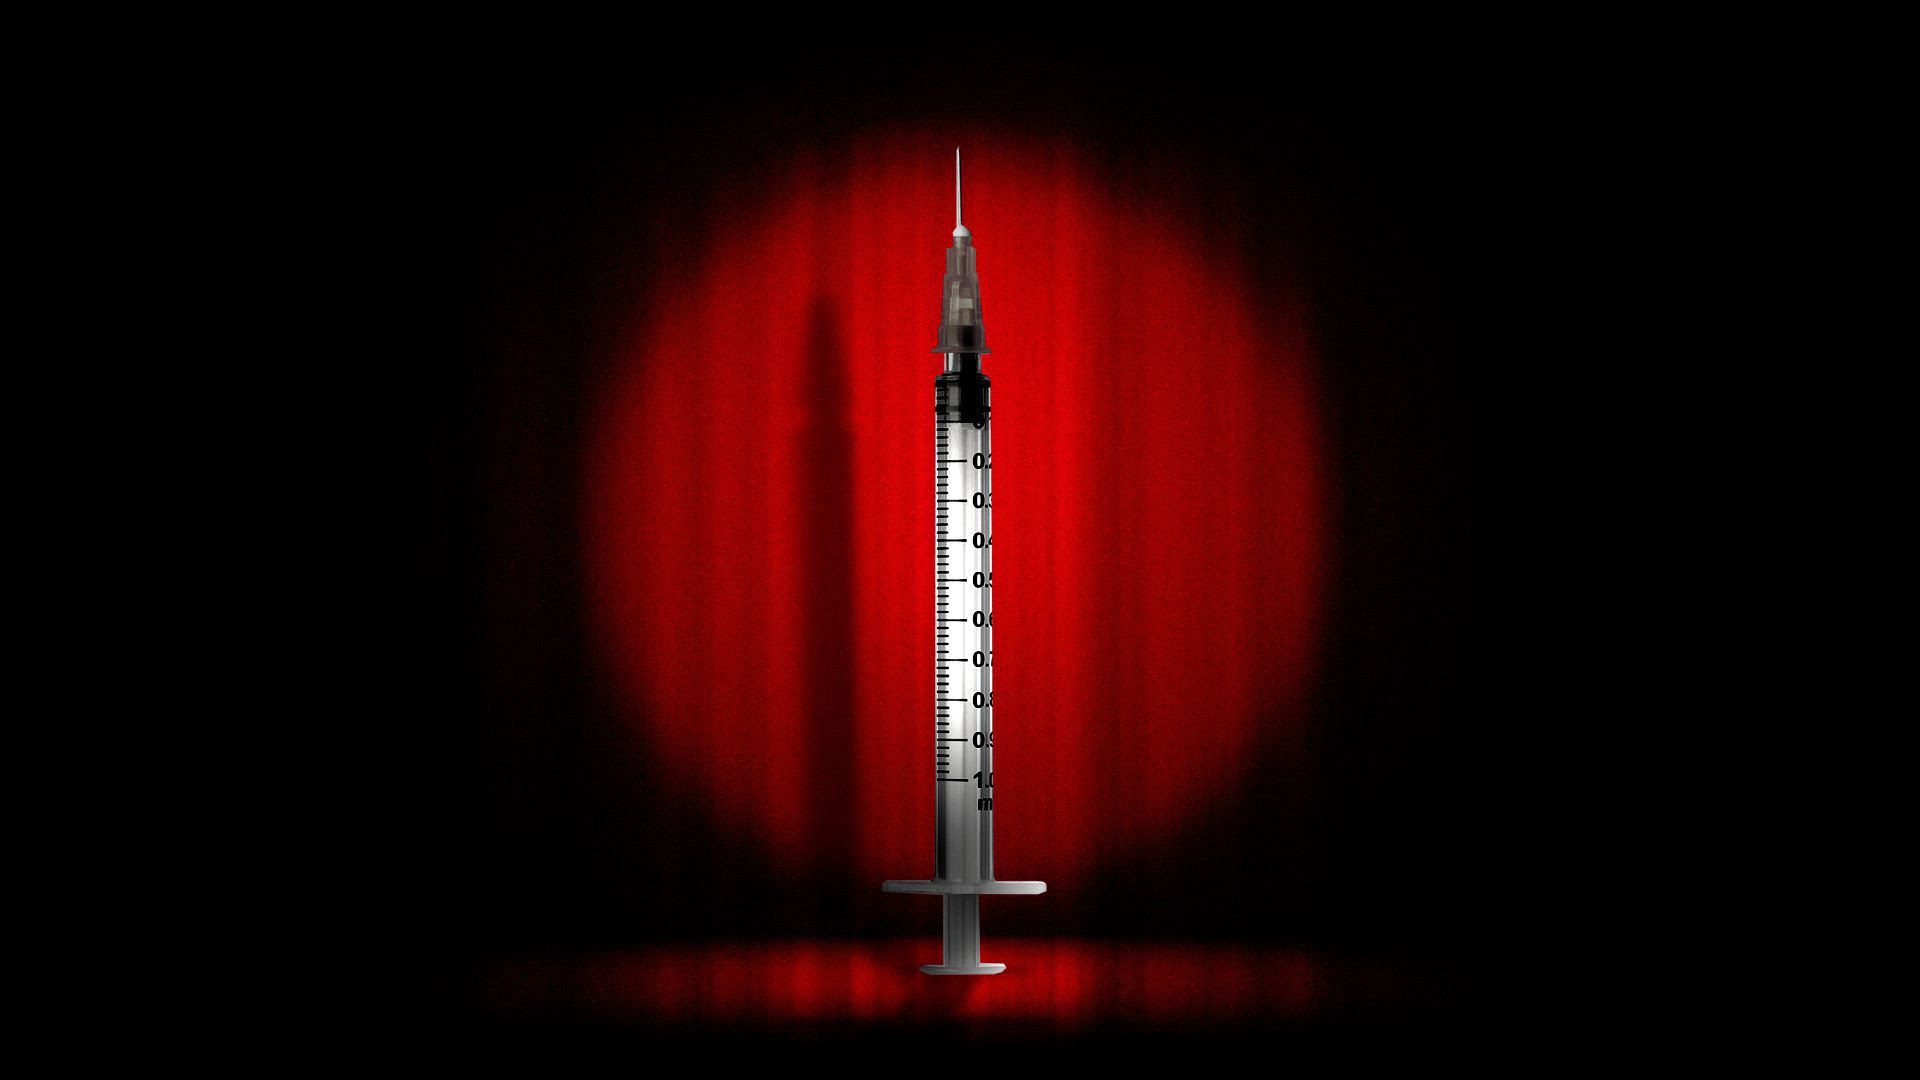 A syringe in the spotlight in front of a red show curtain